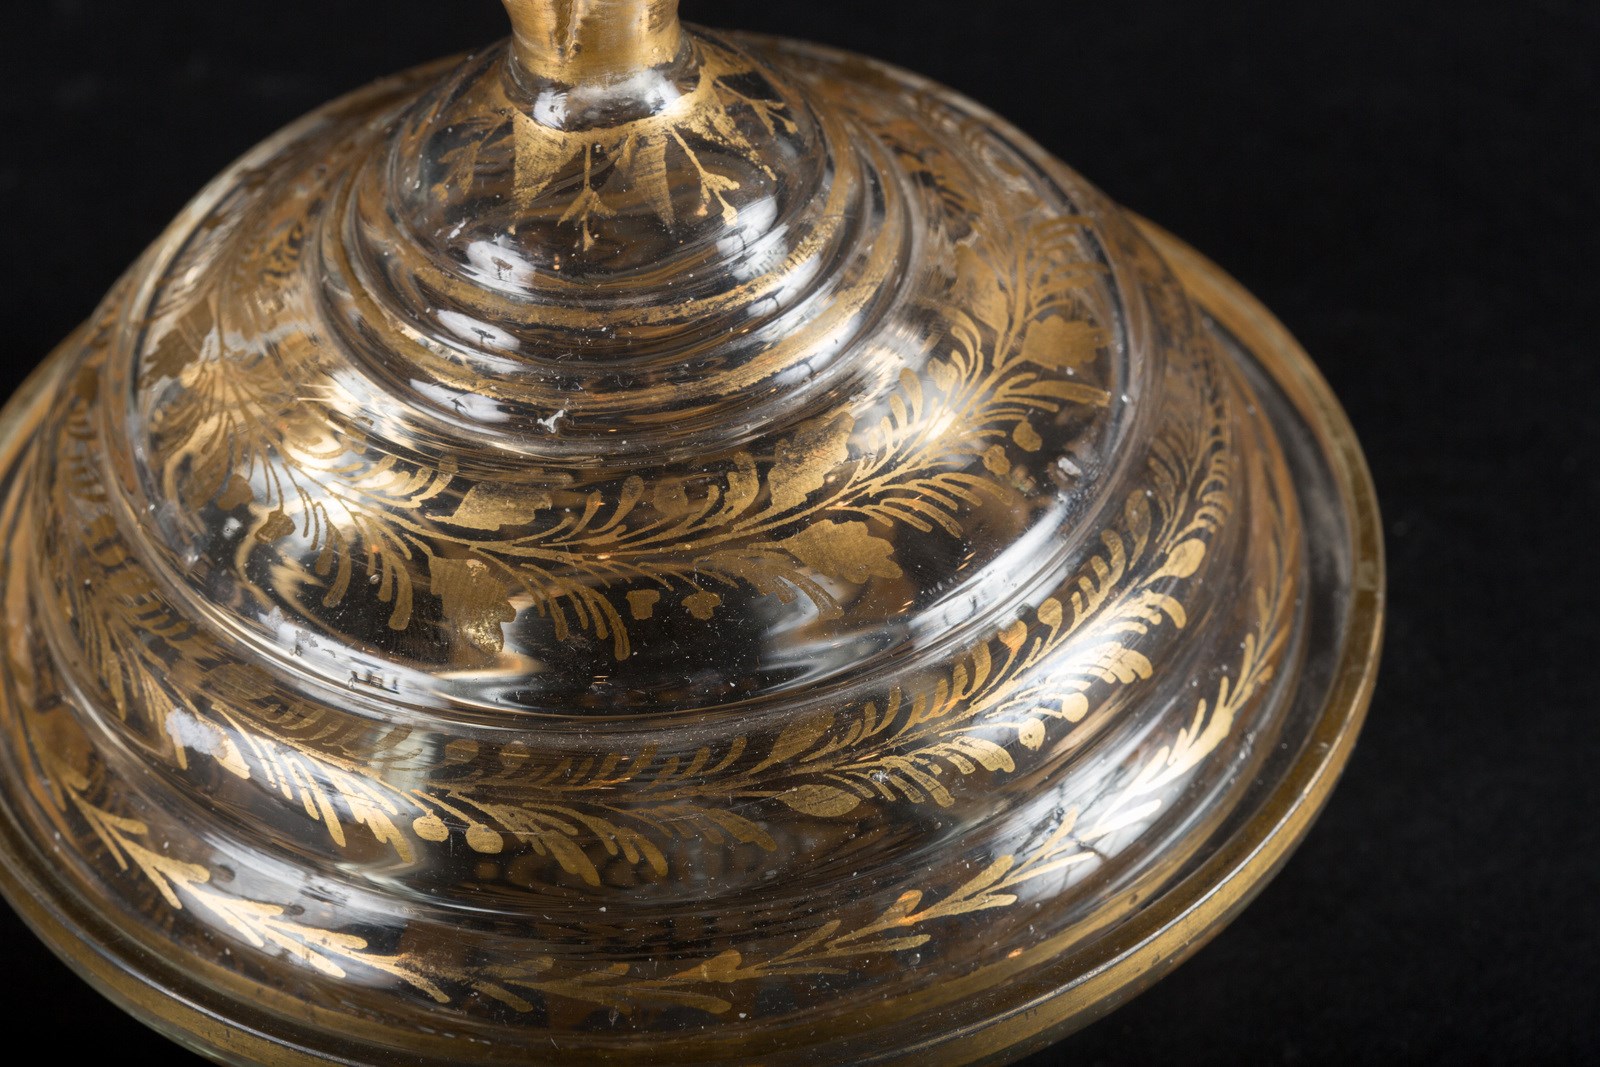 Arte Islamica An Ottoman clear glass covered bowl (sahan) with gilded floral decoration Turkey, 19t - Image 3 of 5